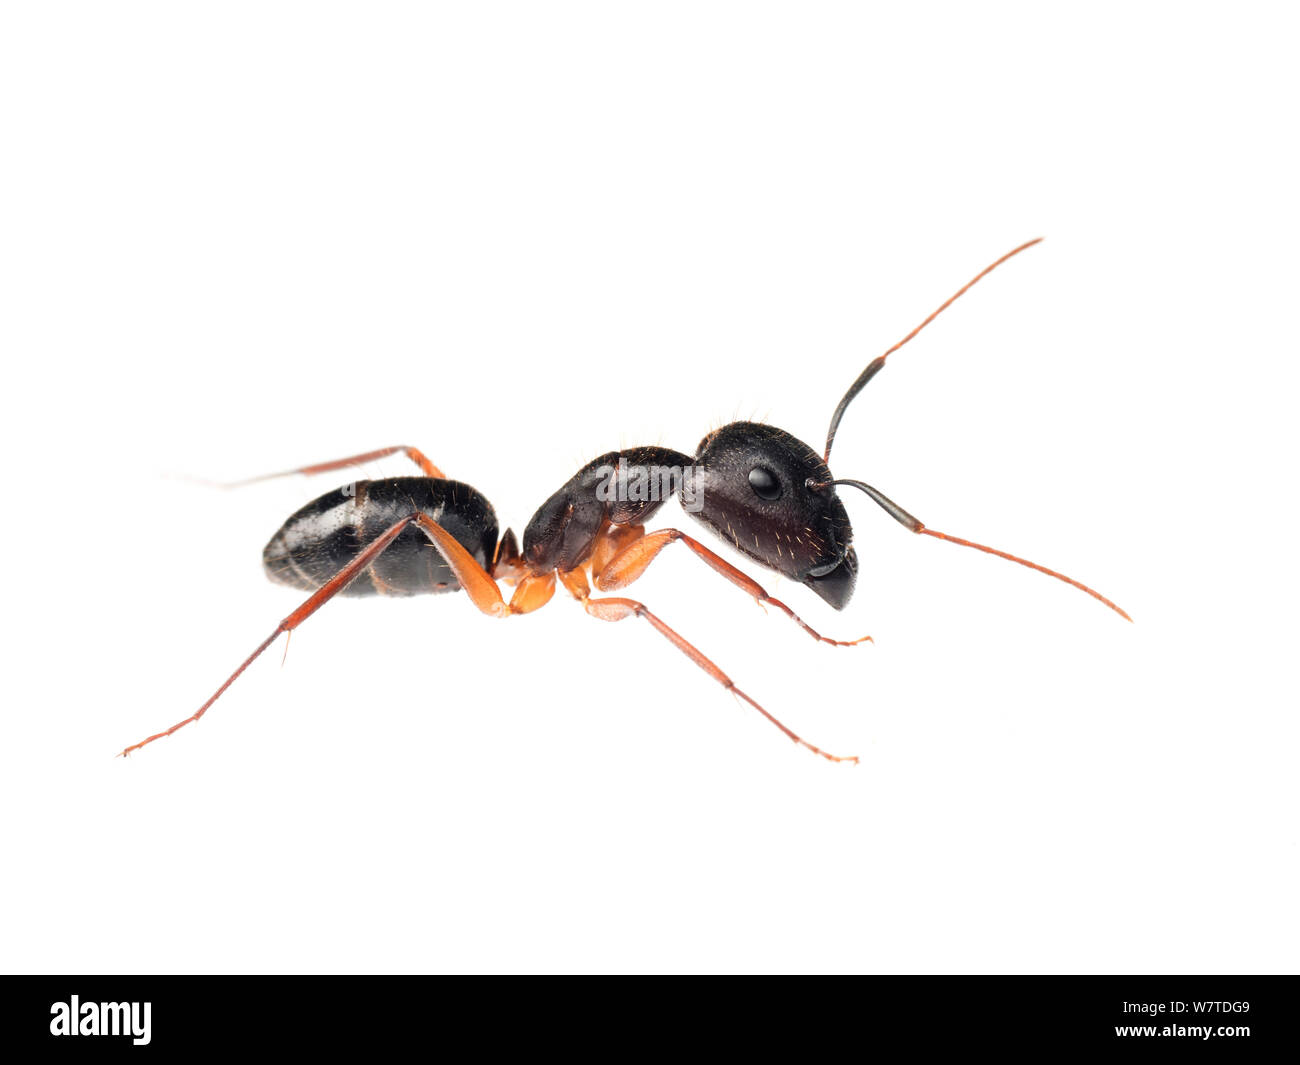 Carpenter ant (Camponotus sp.) Sorocaba, Sao Paolo, Brazil. Meetyourneighbours.net project Stock Photo